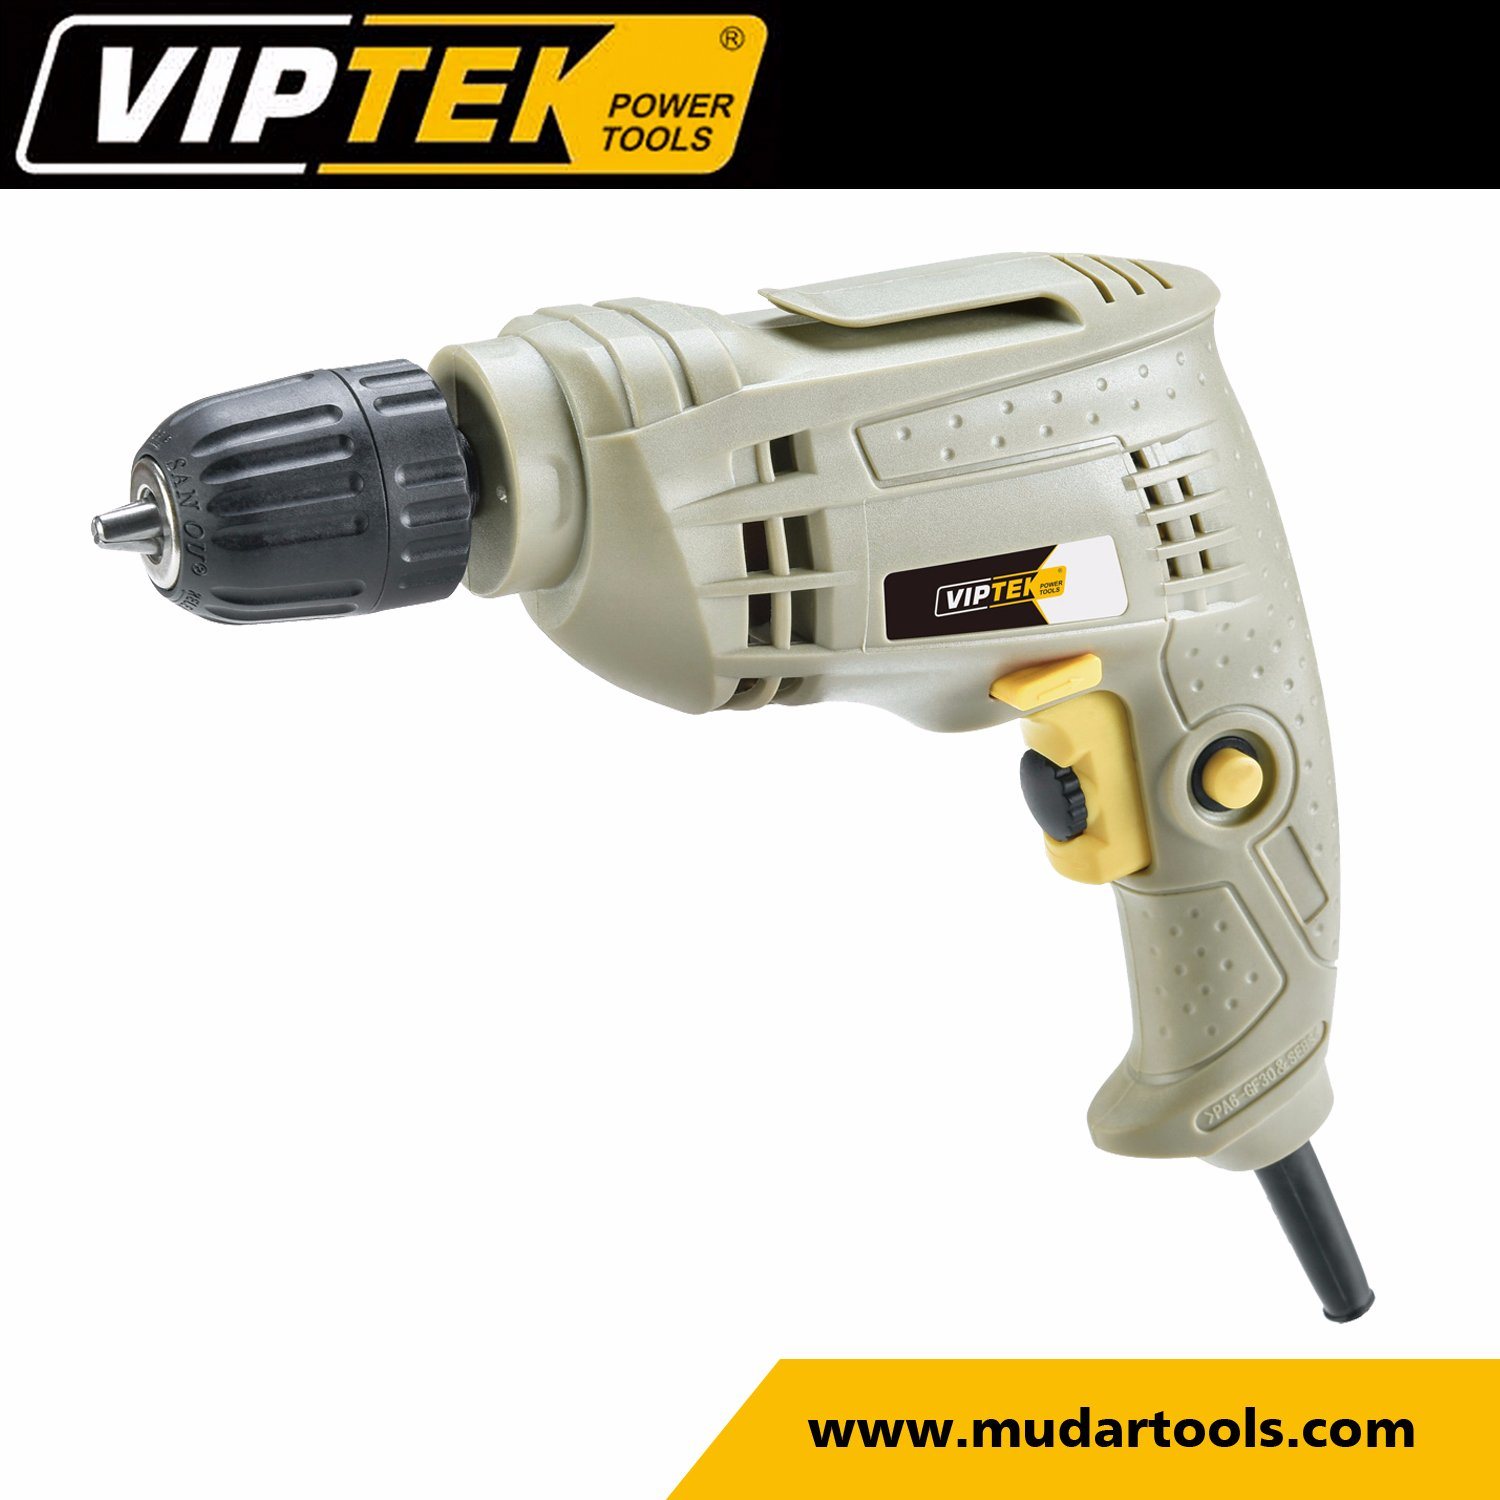 450W Professional Power Tools with Electric Drill (T10450)